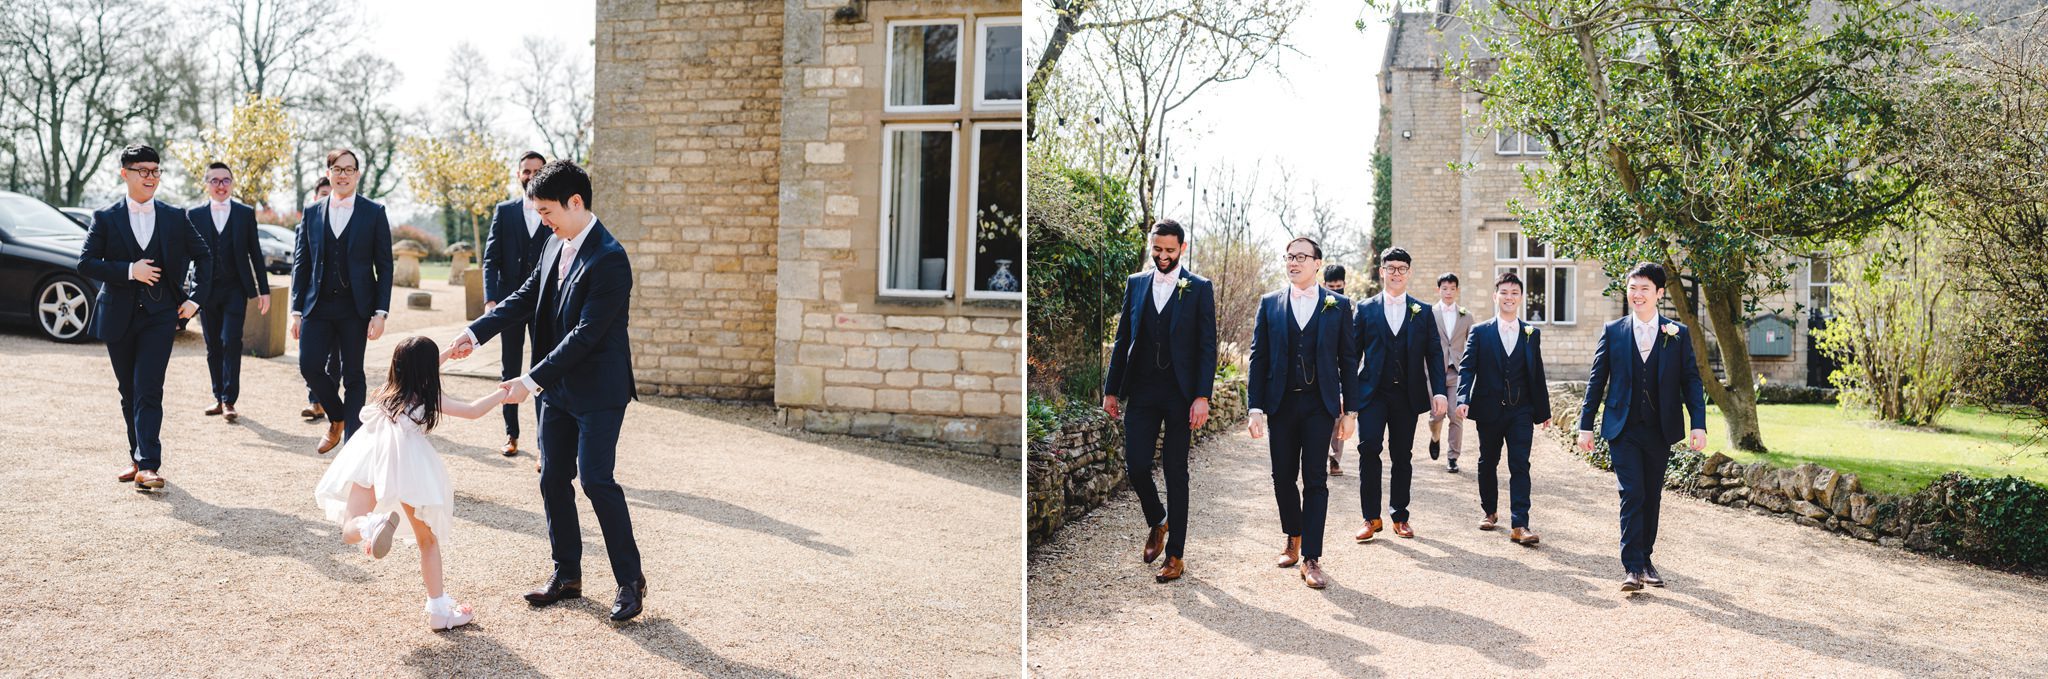 Chinese groomsmen in the Cotswolds